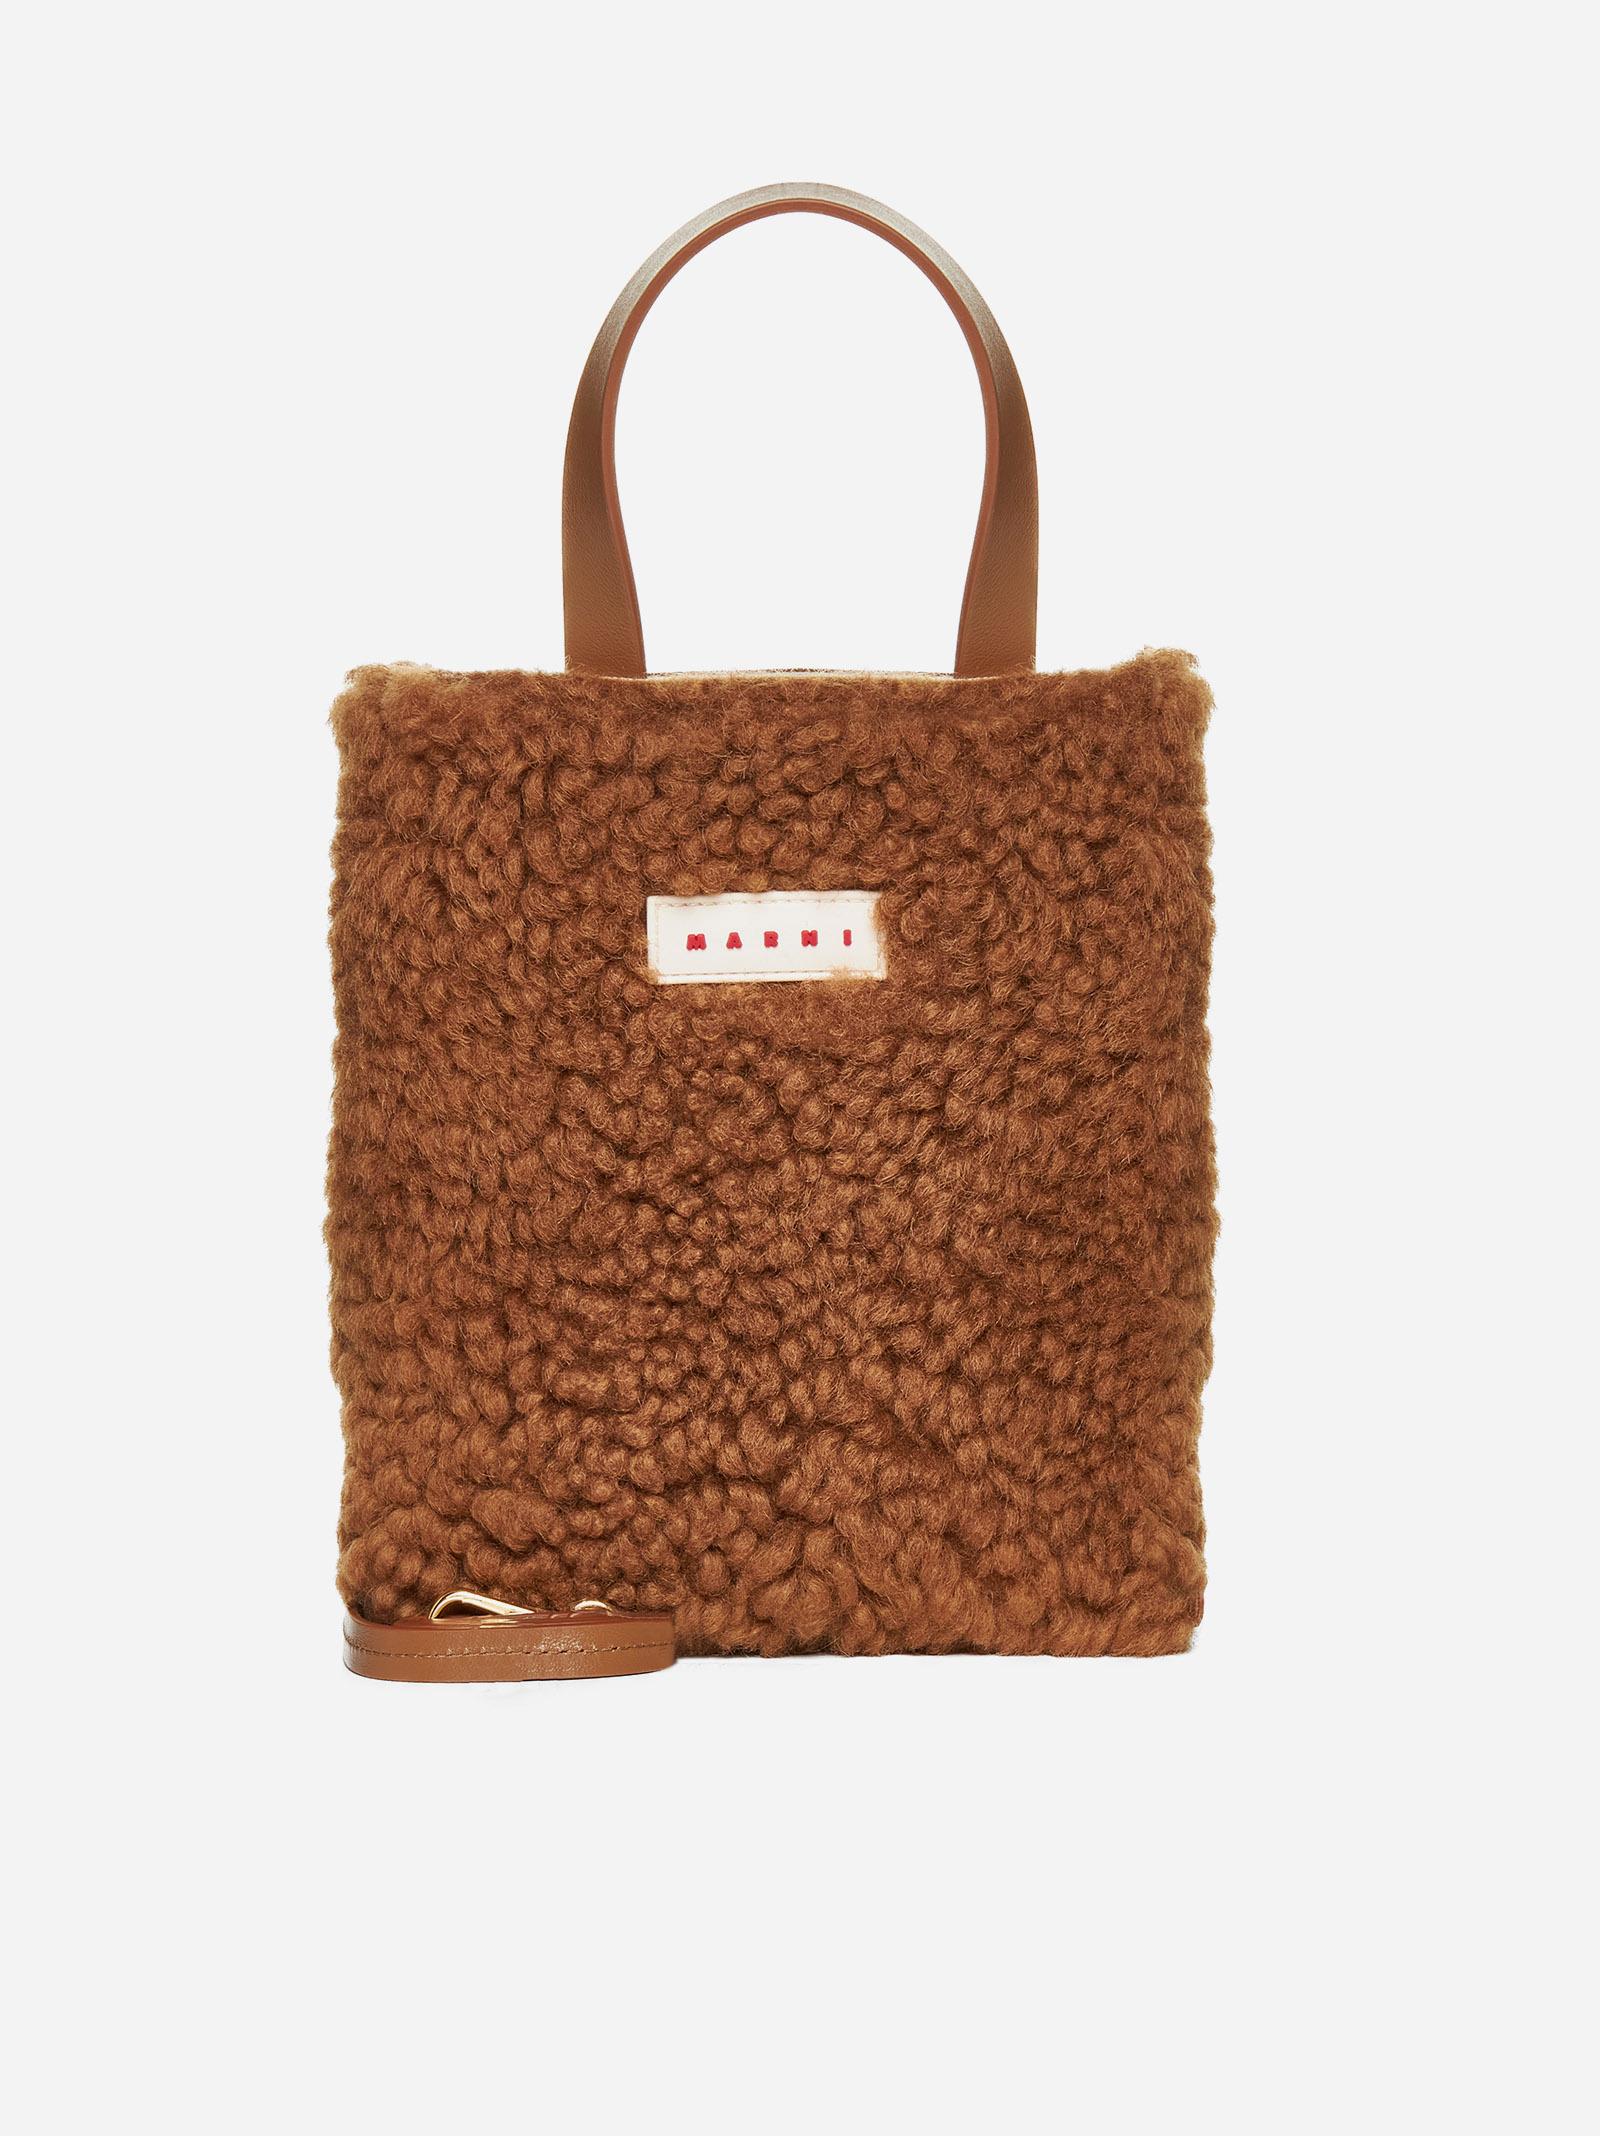 MARNI Leather-trimmed shearling and vinyl tote